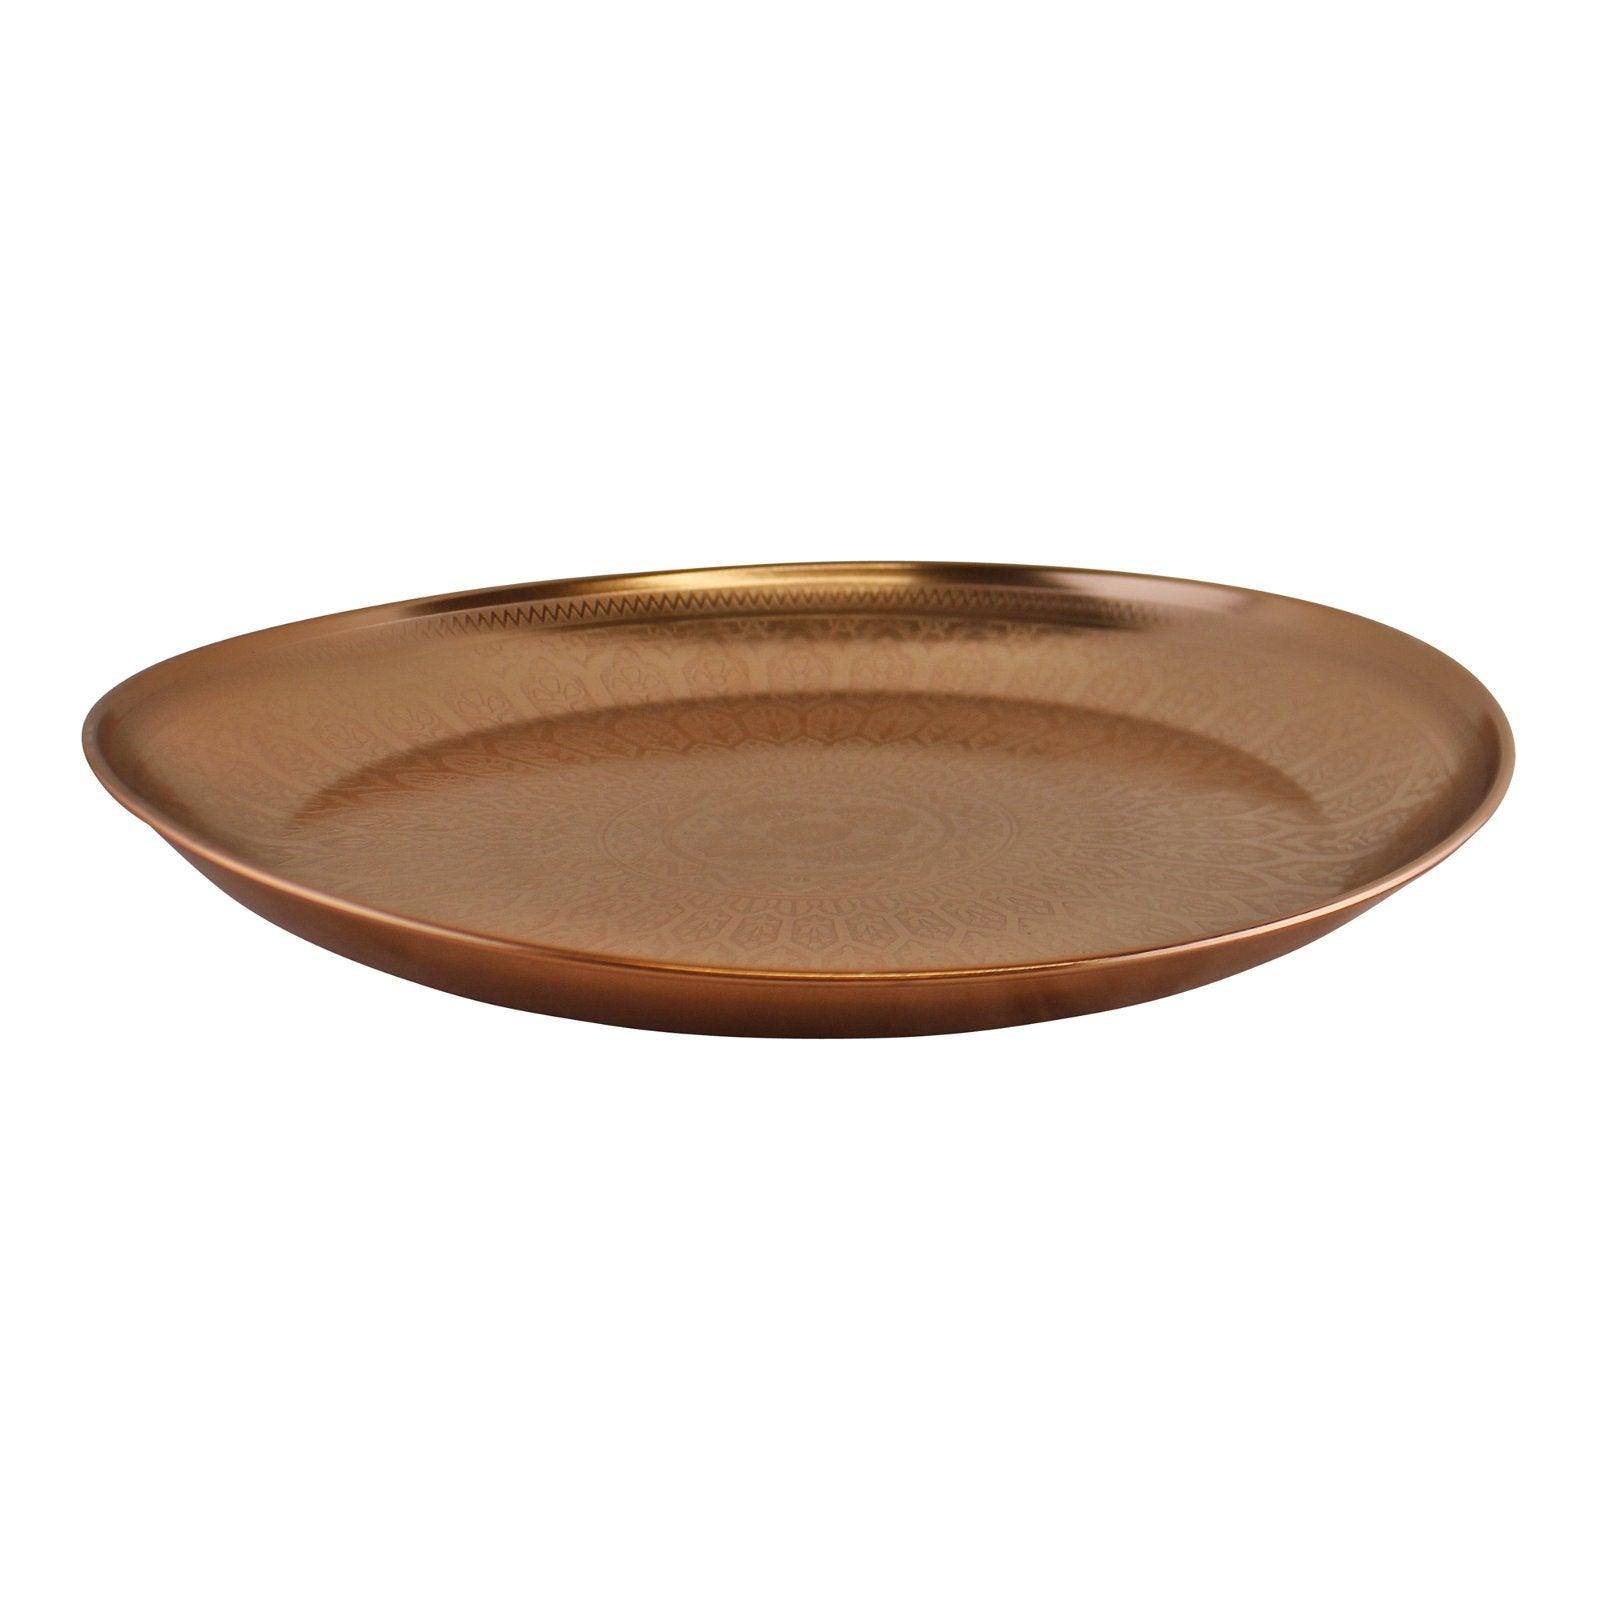 View Decorative Copper Metal Tray With Etched Design information